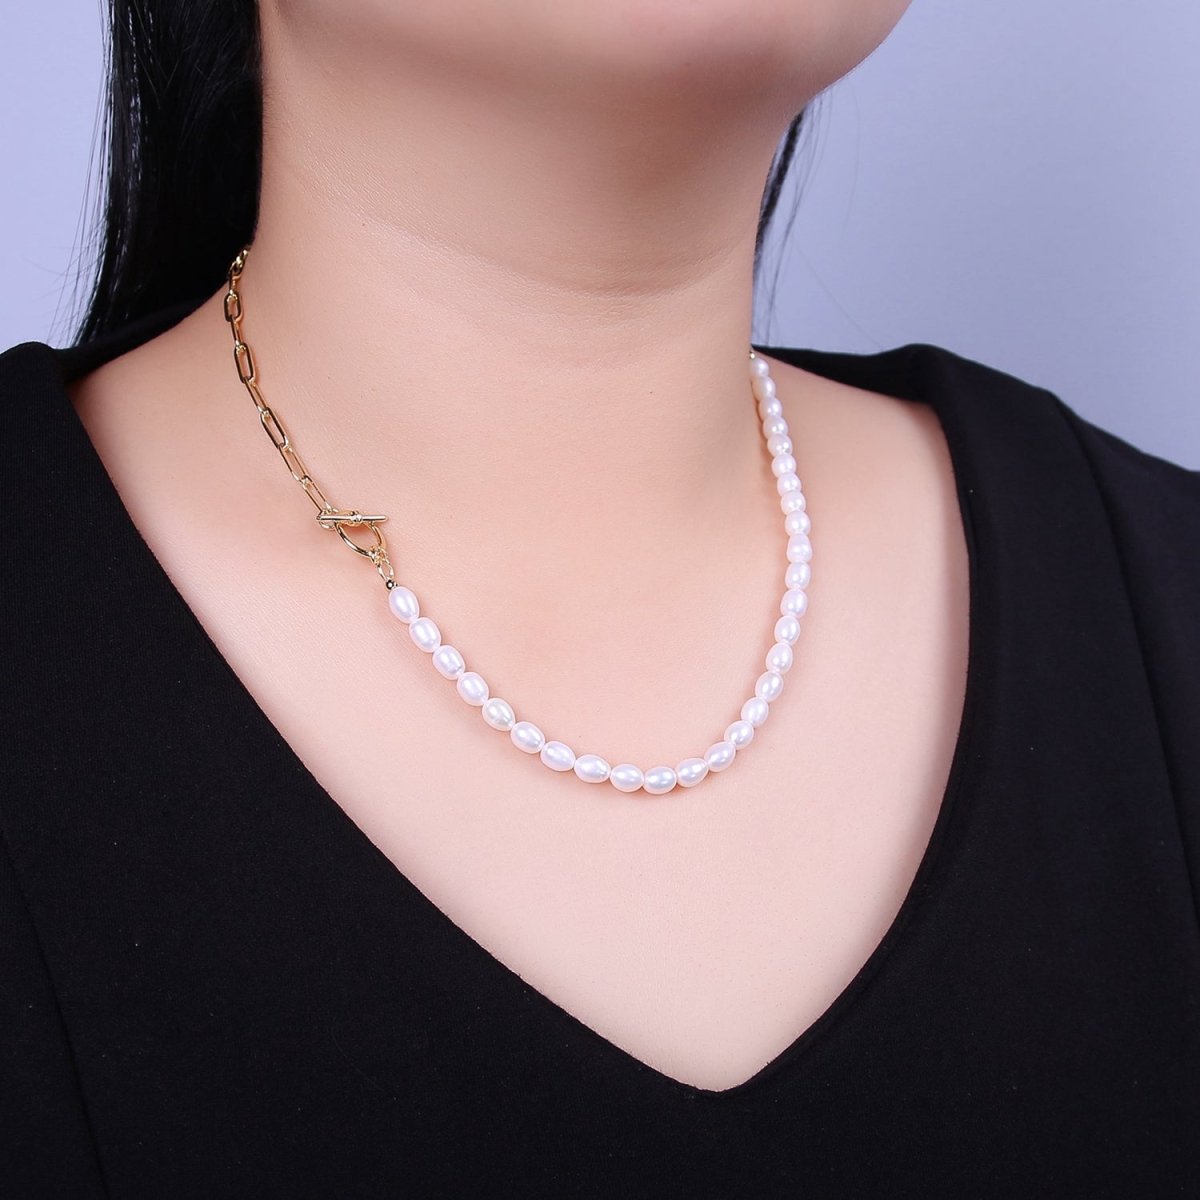 Half beaded half chain necklace in 18k gold filled | Layer Necklace paper clip chain rectangle | White Freshwater Pearl | WA-863 Clearance Pricing - DLUXCA